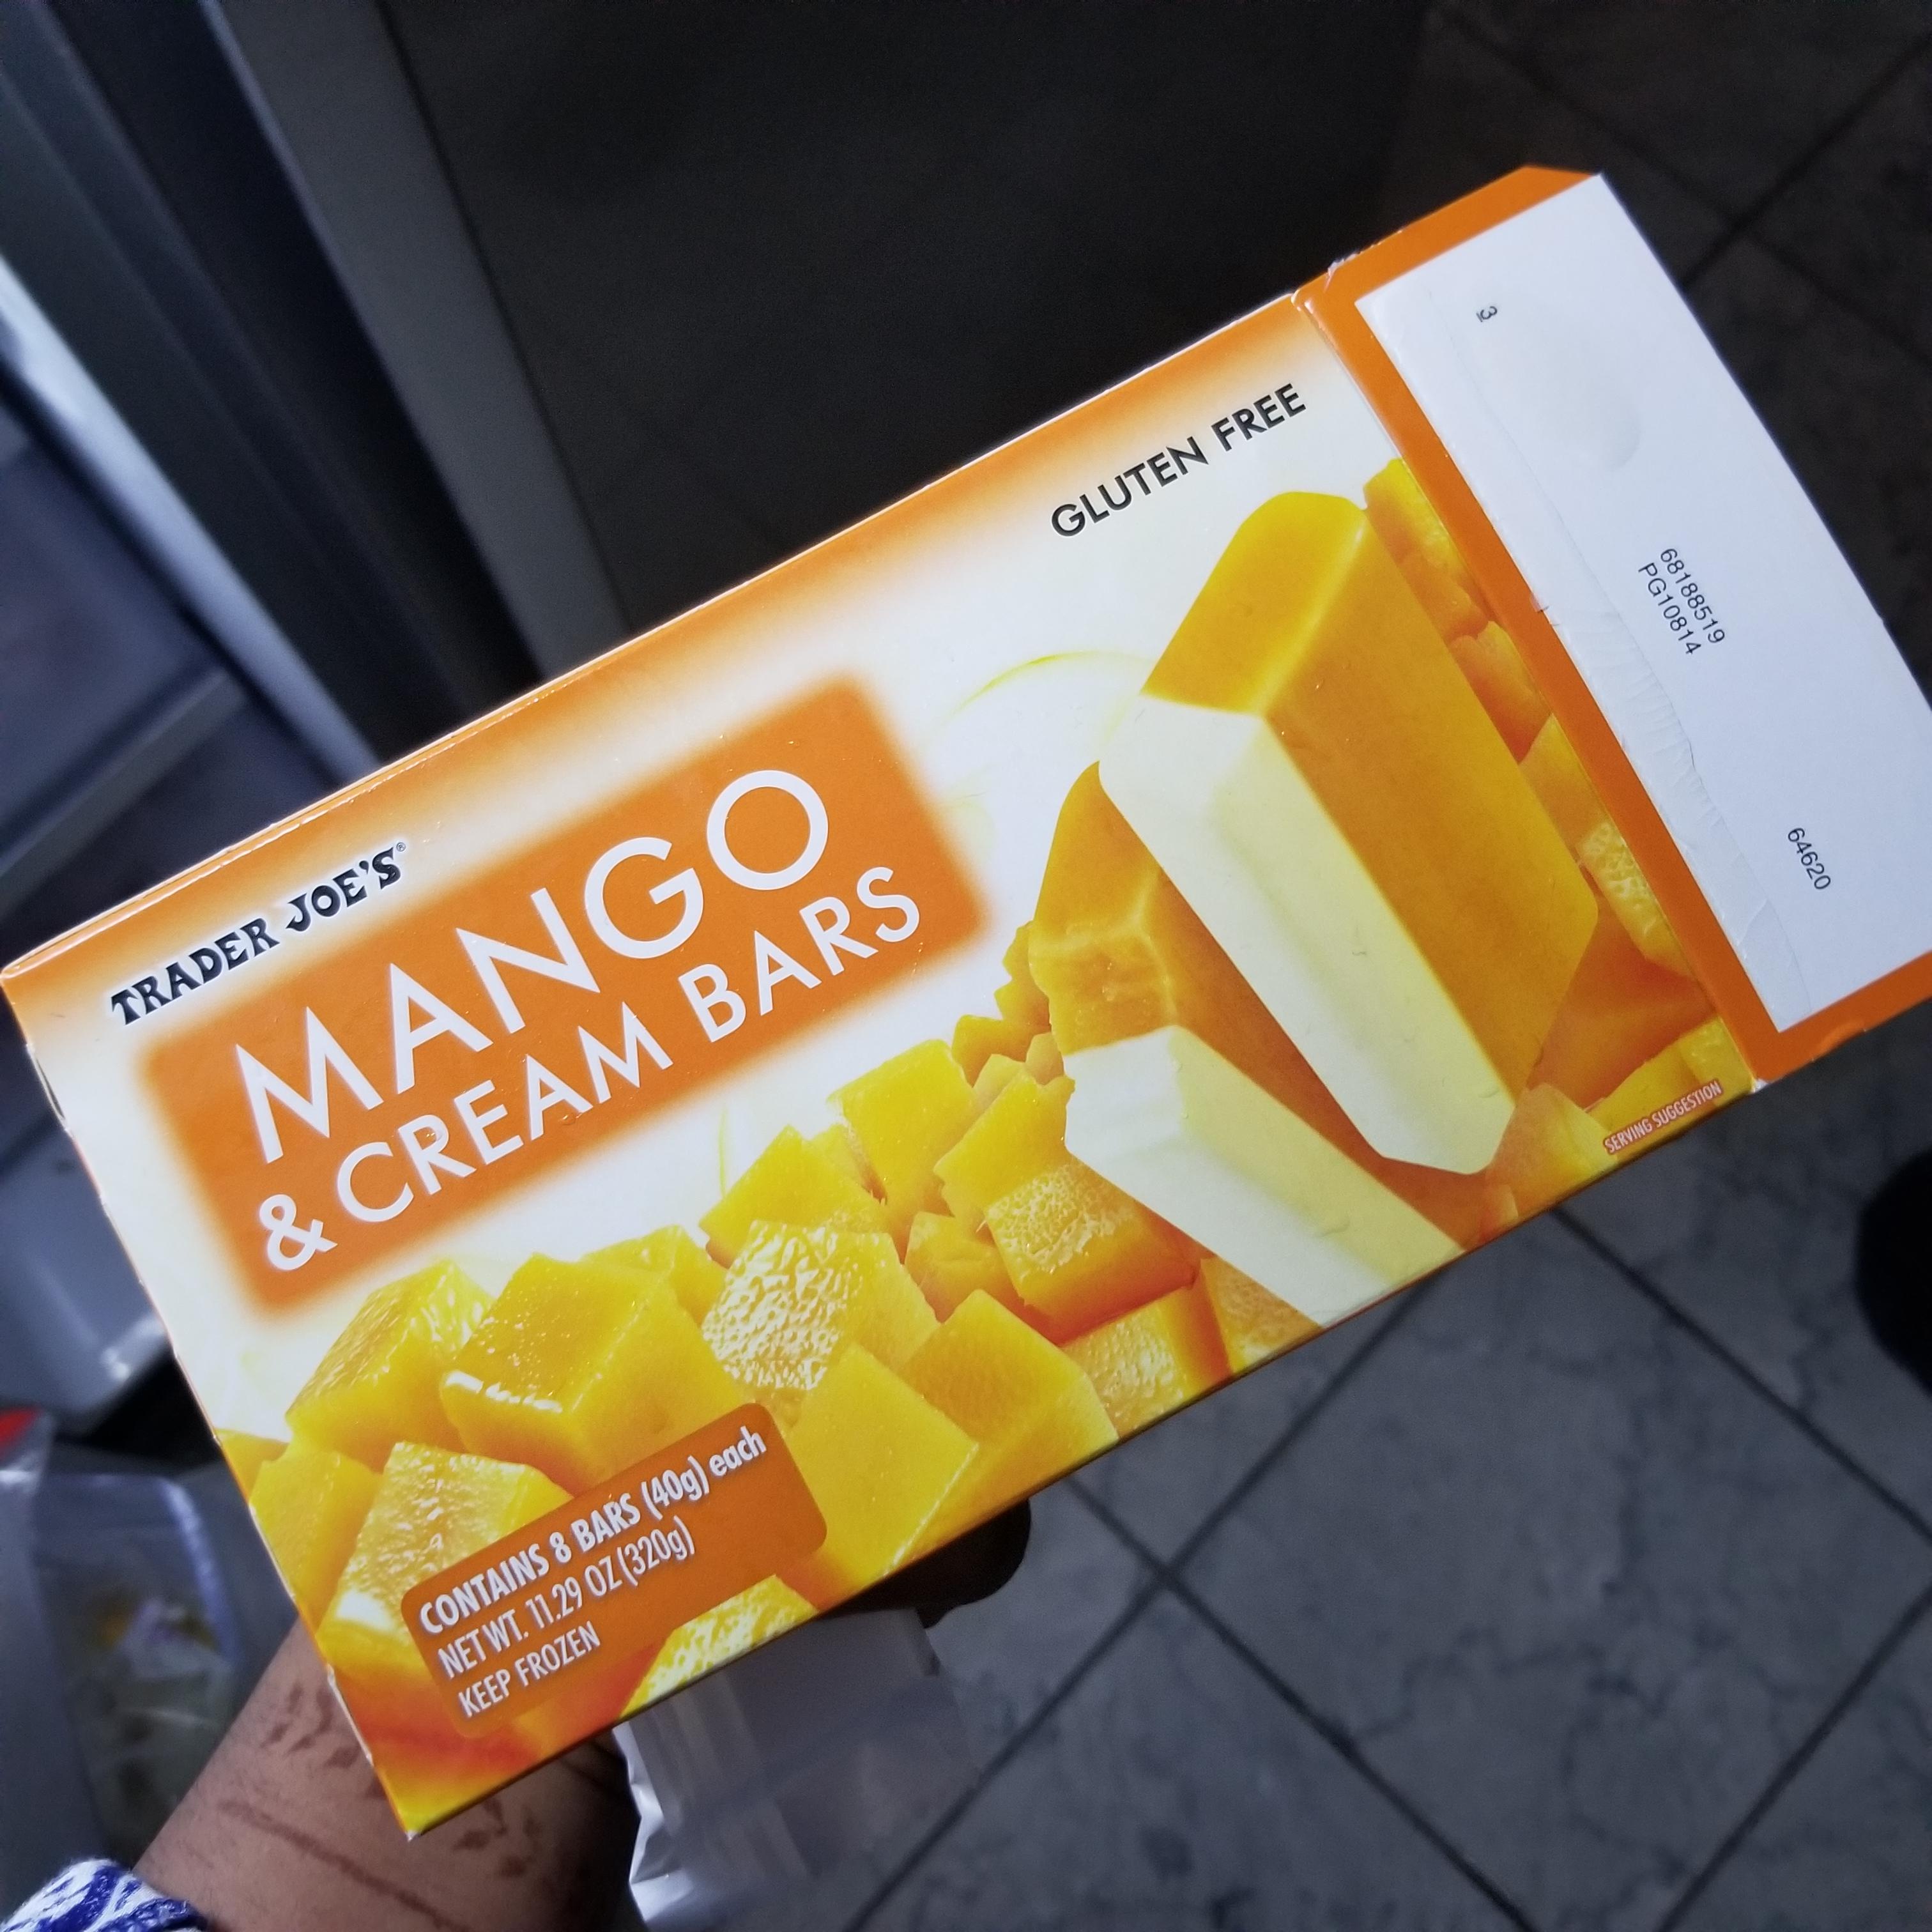 Mango Cream Bars From Trader Joe S 53 Cal Per Bar 160 For One Serving 430 For The Whole Box Dining And Cooking